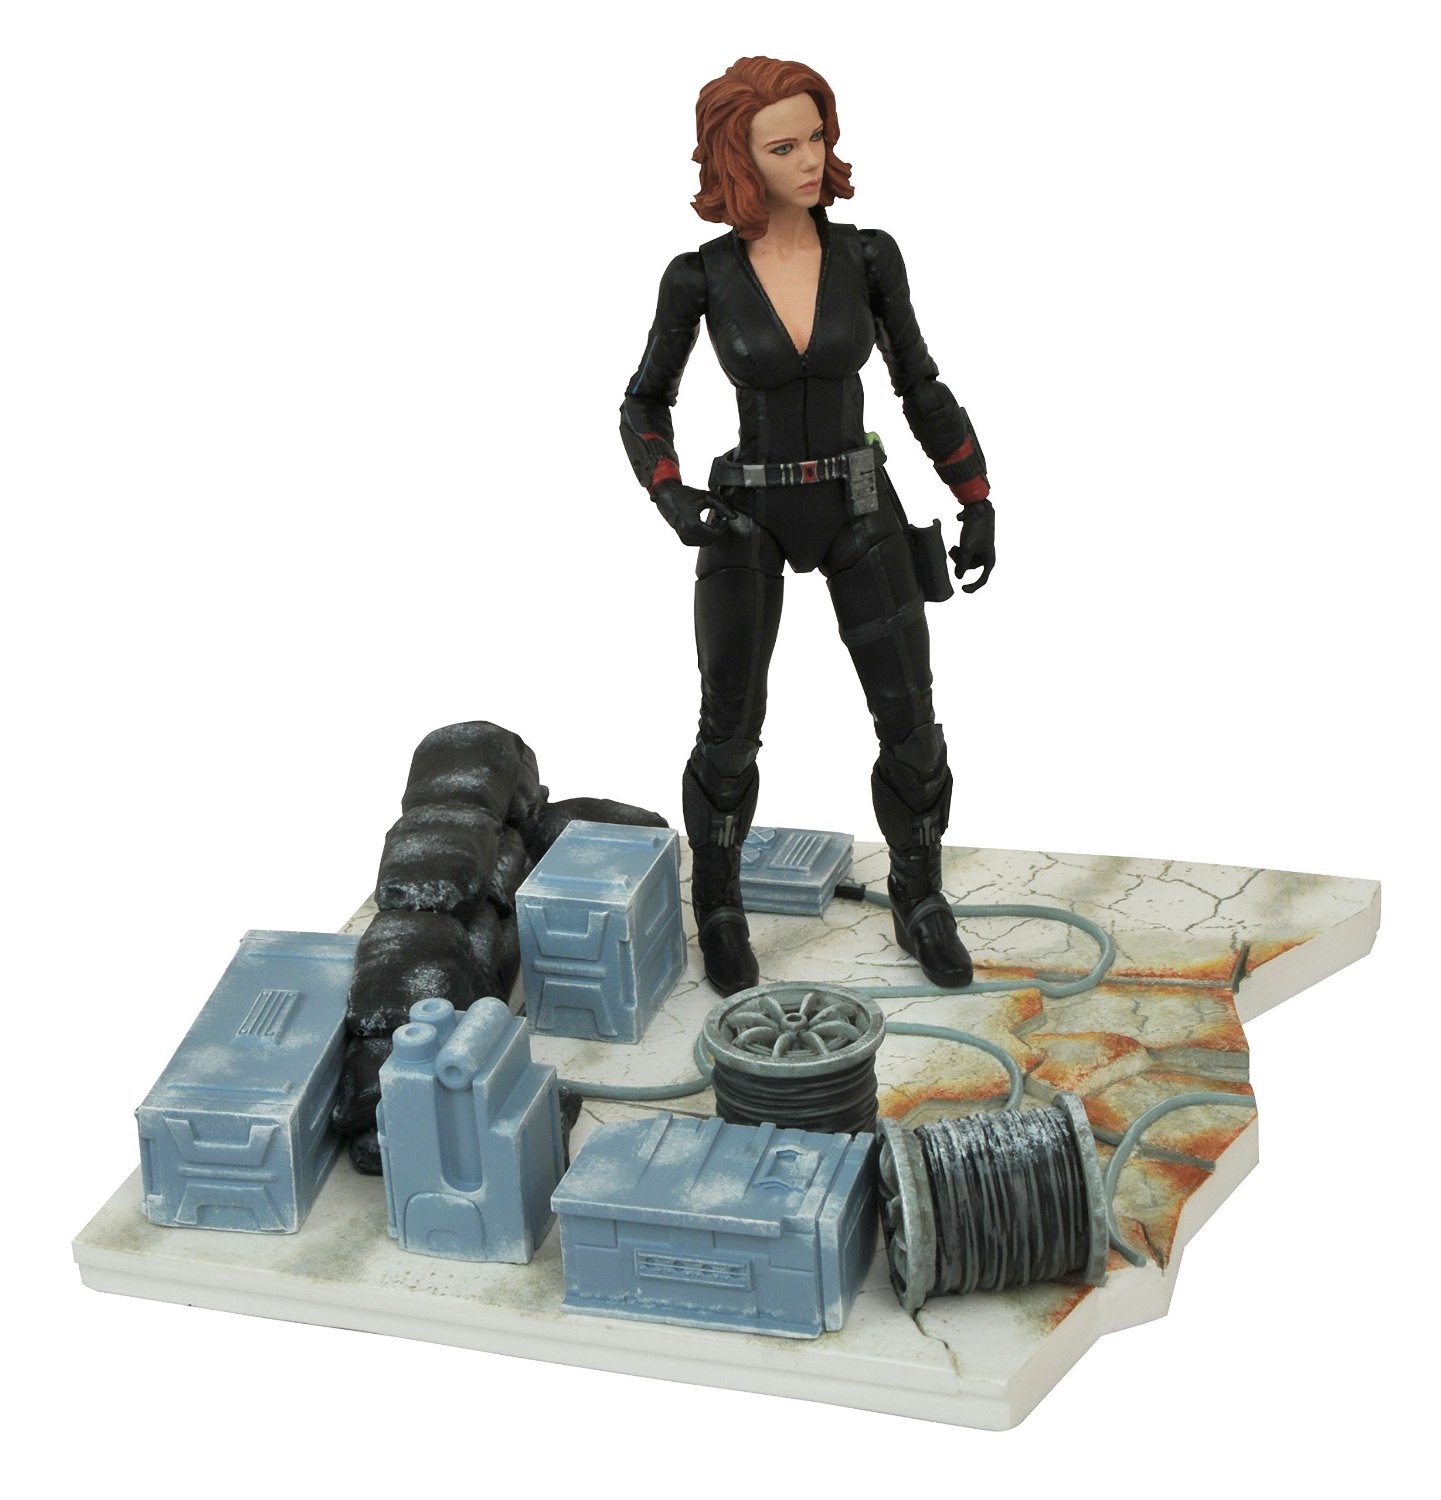 4 inches tall Black Widow PVC Figure makes a great cake topper or a fun toy! 